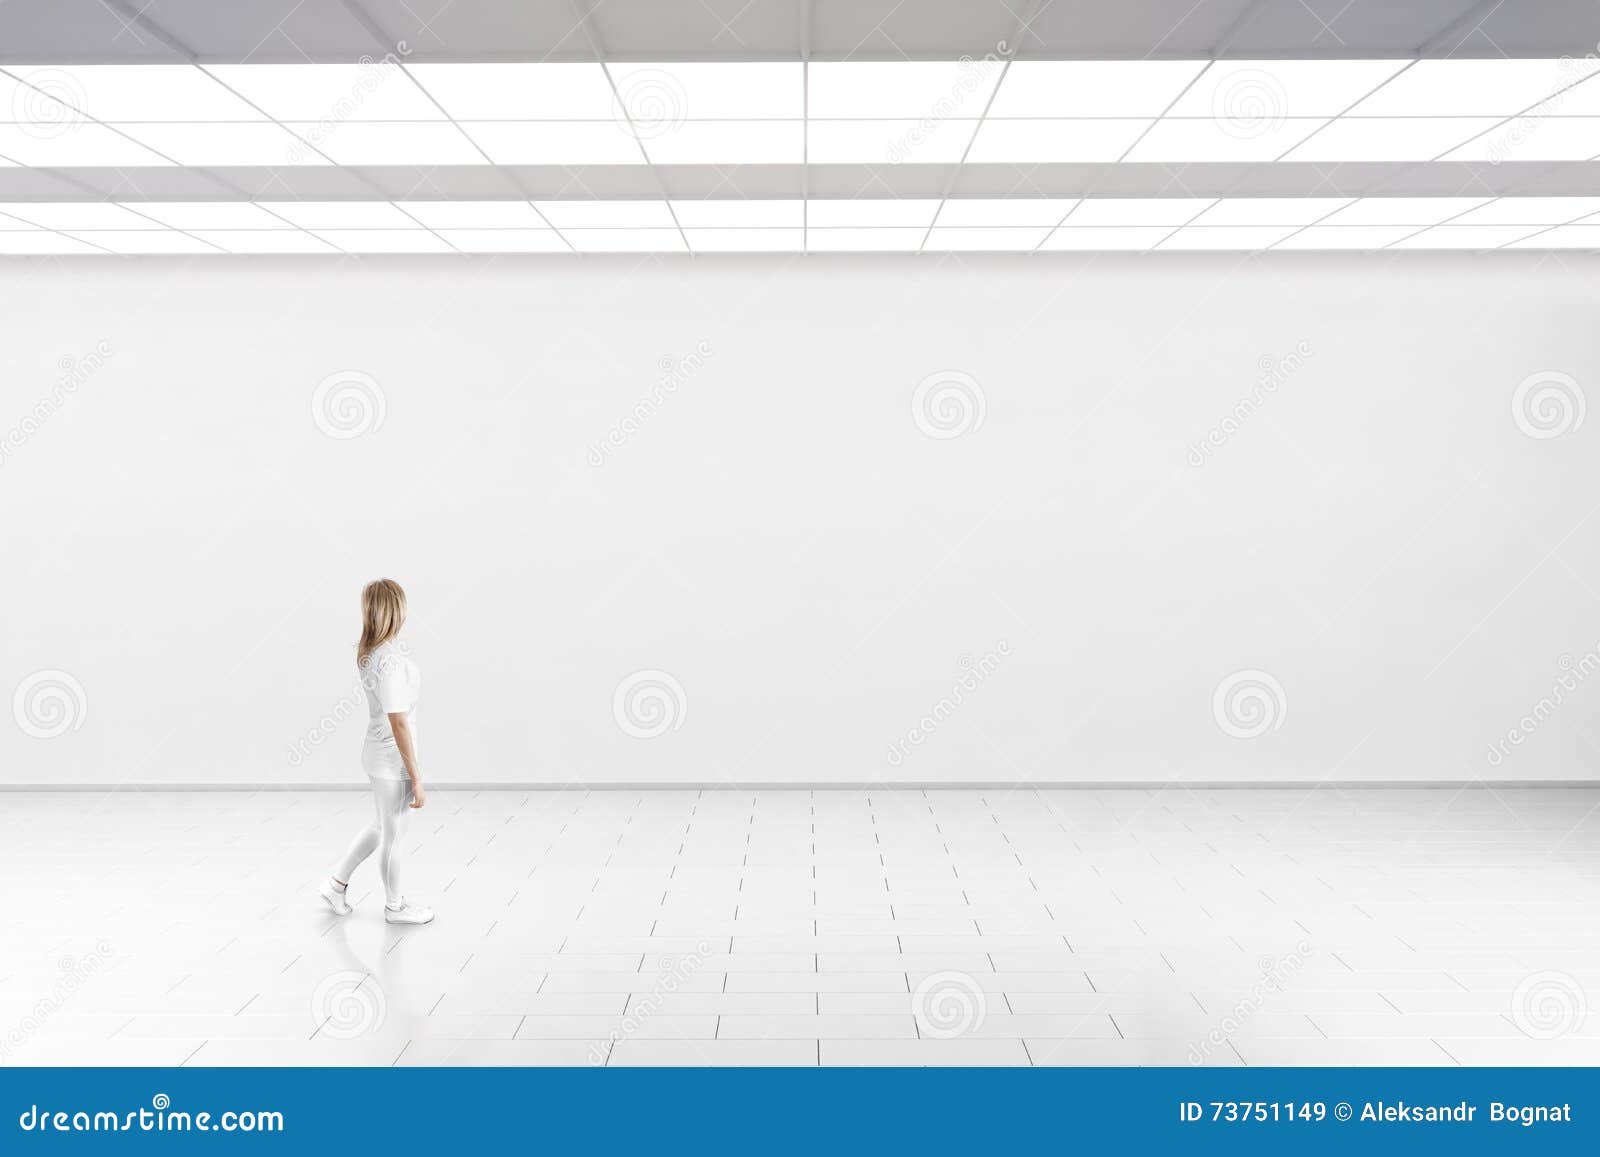 woman walk in museum gallery with blank wall.